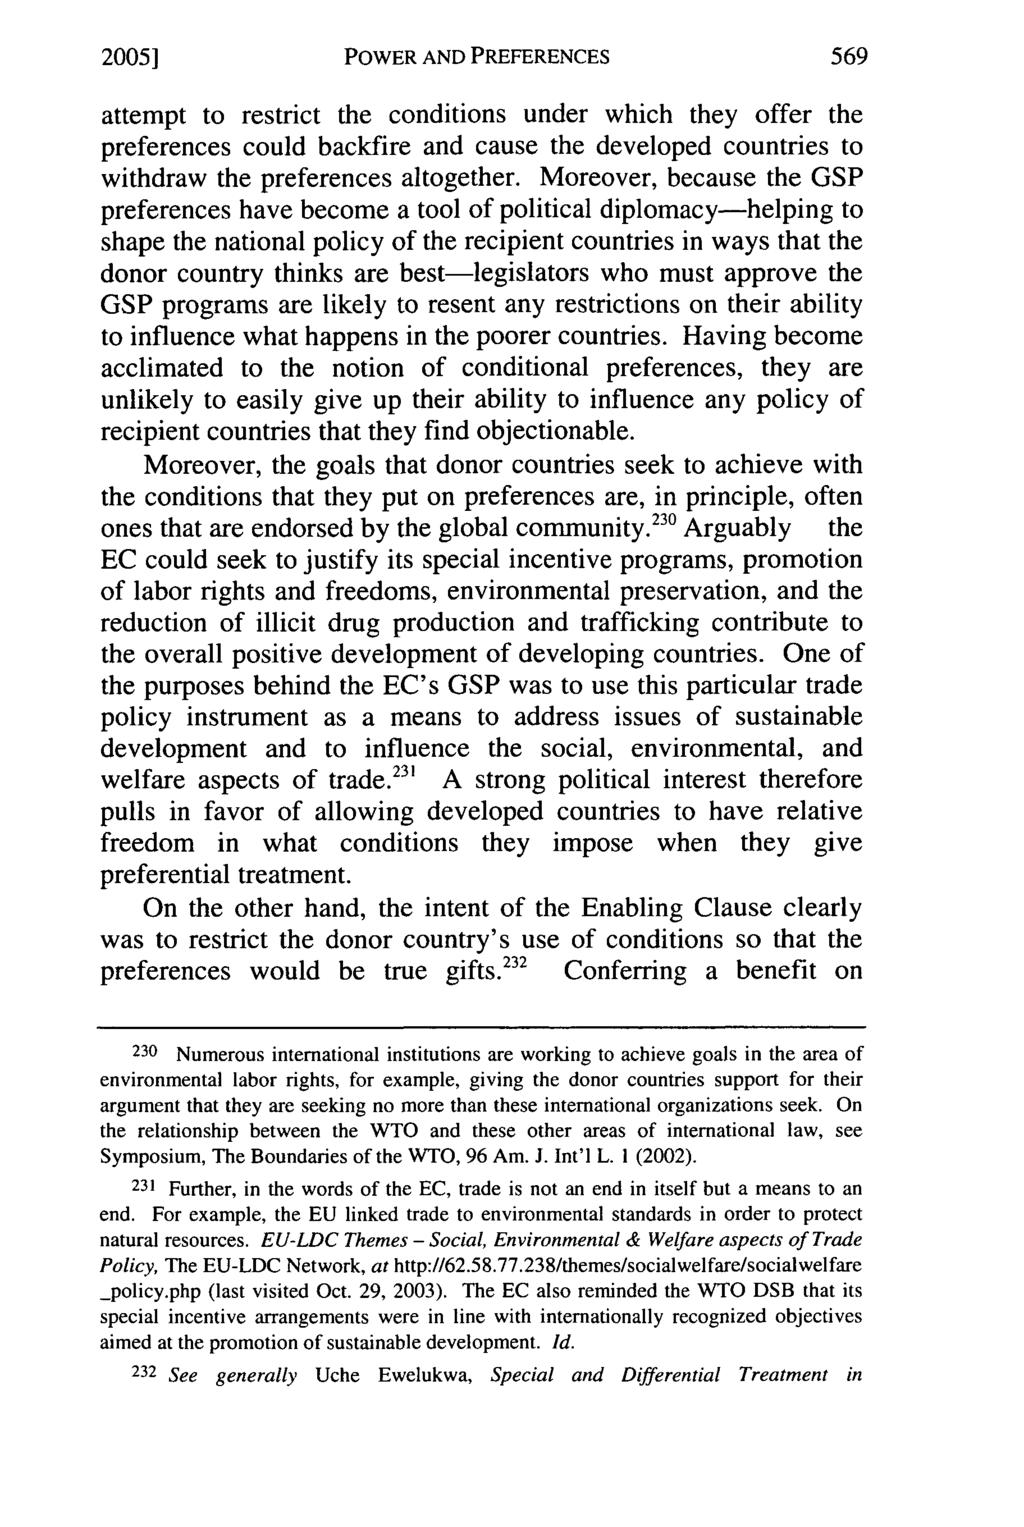 2005] POWER AND PREFERENCES attempt to restrict the conditions under which they offer the preferences could backfire and cause the developed countries to withdraw the preferences altogether.